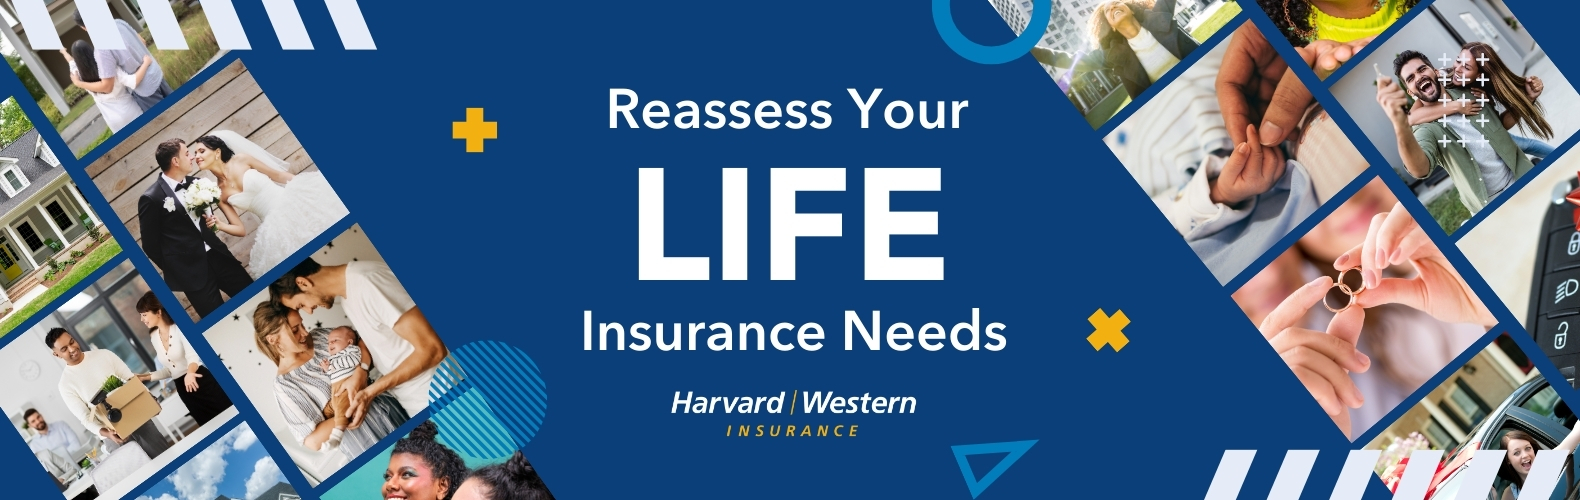 reassess your life insurance needs